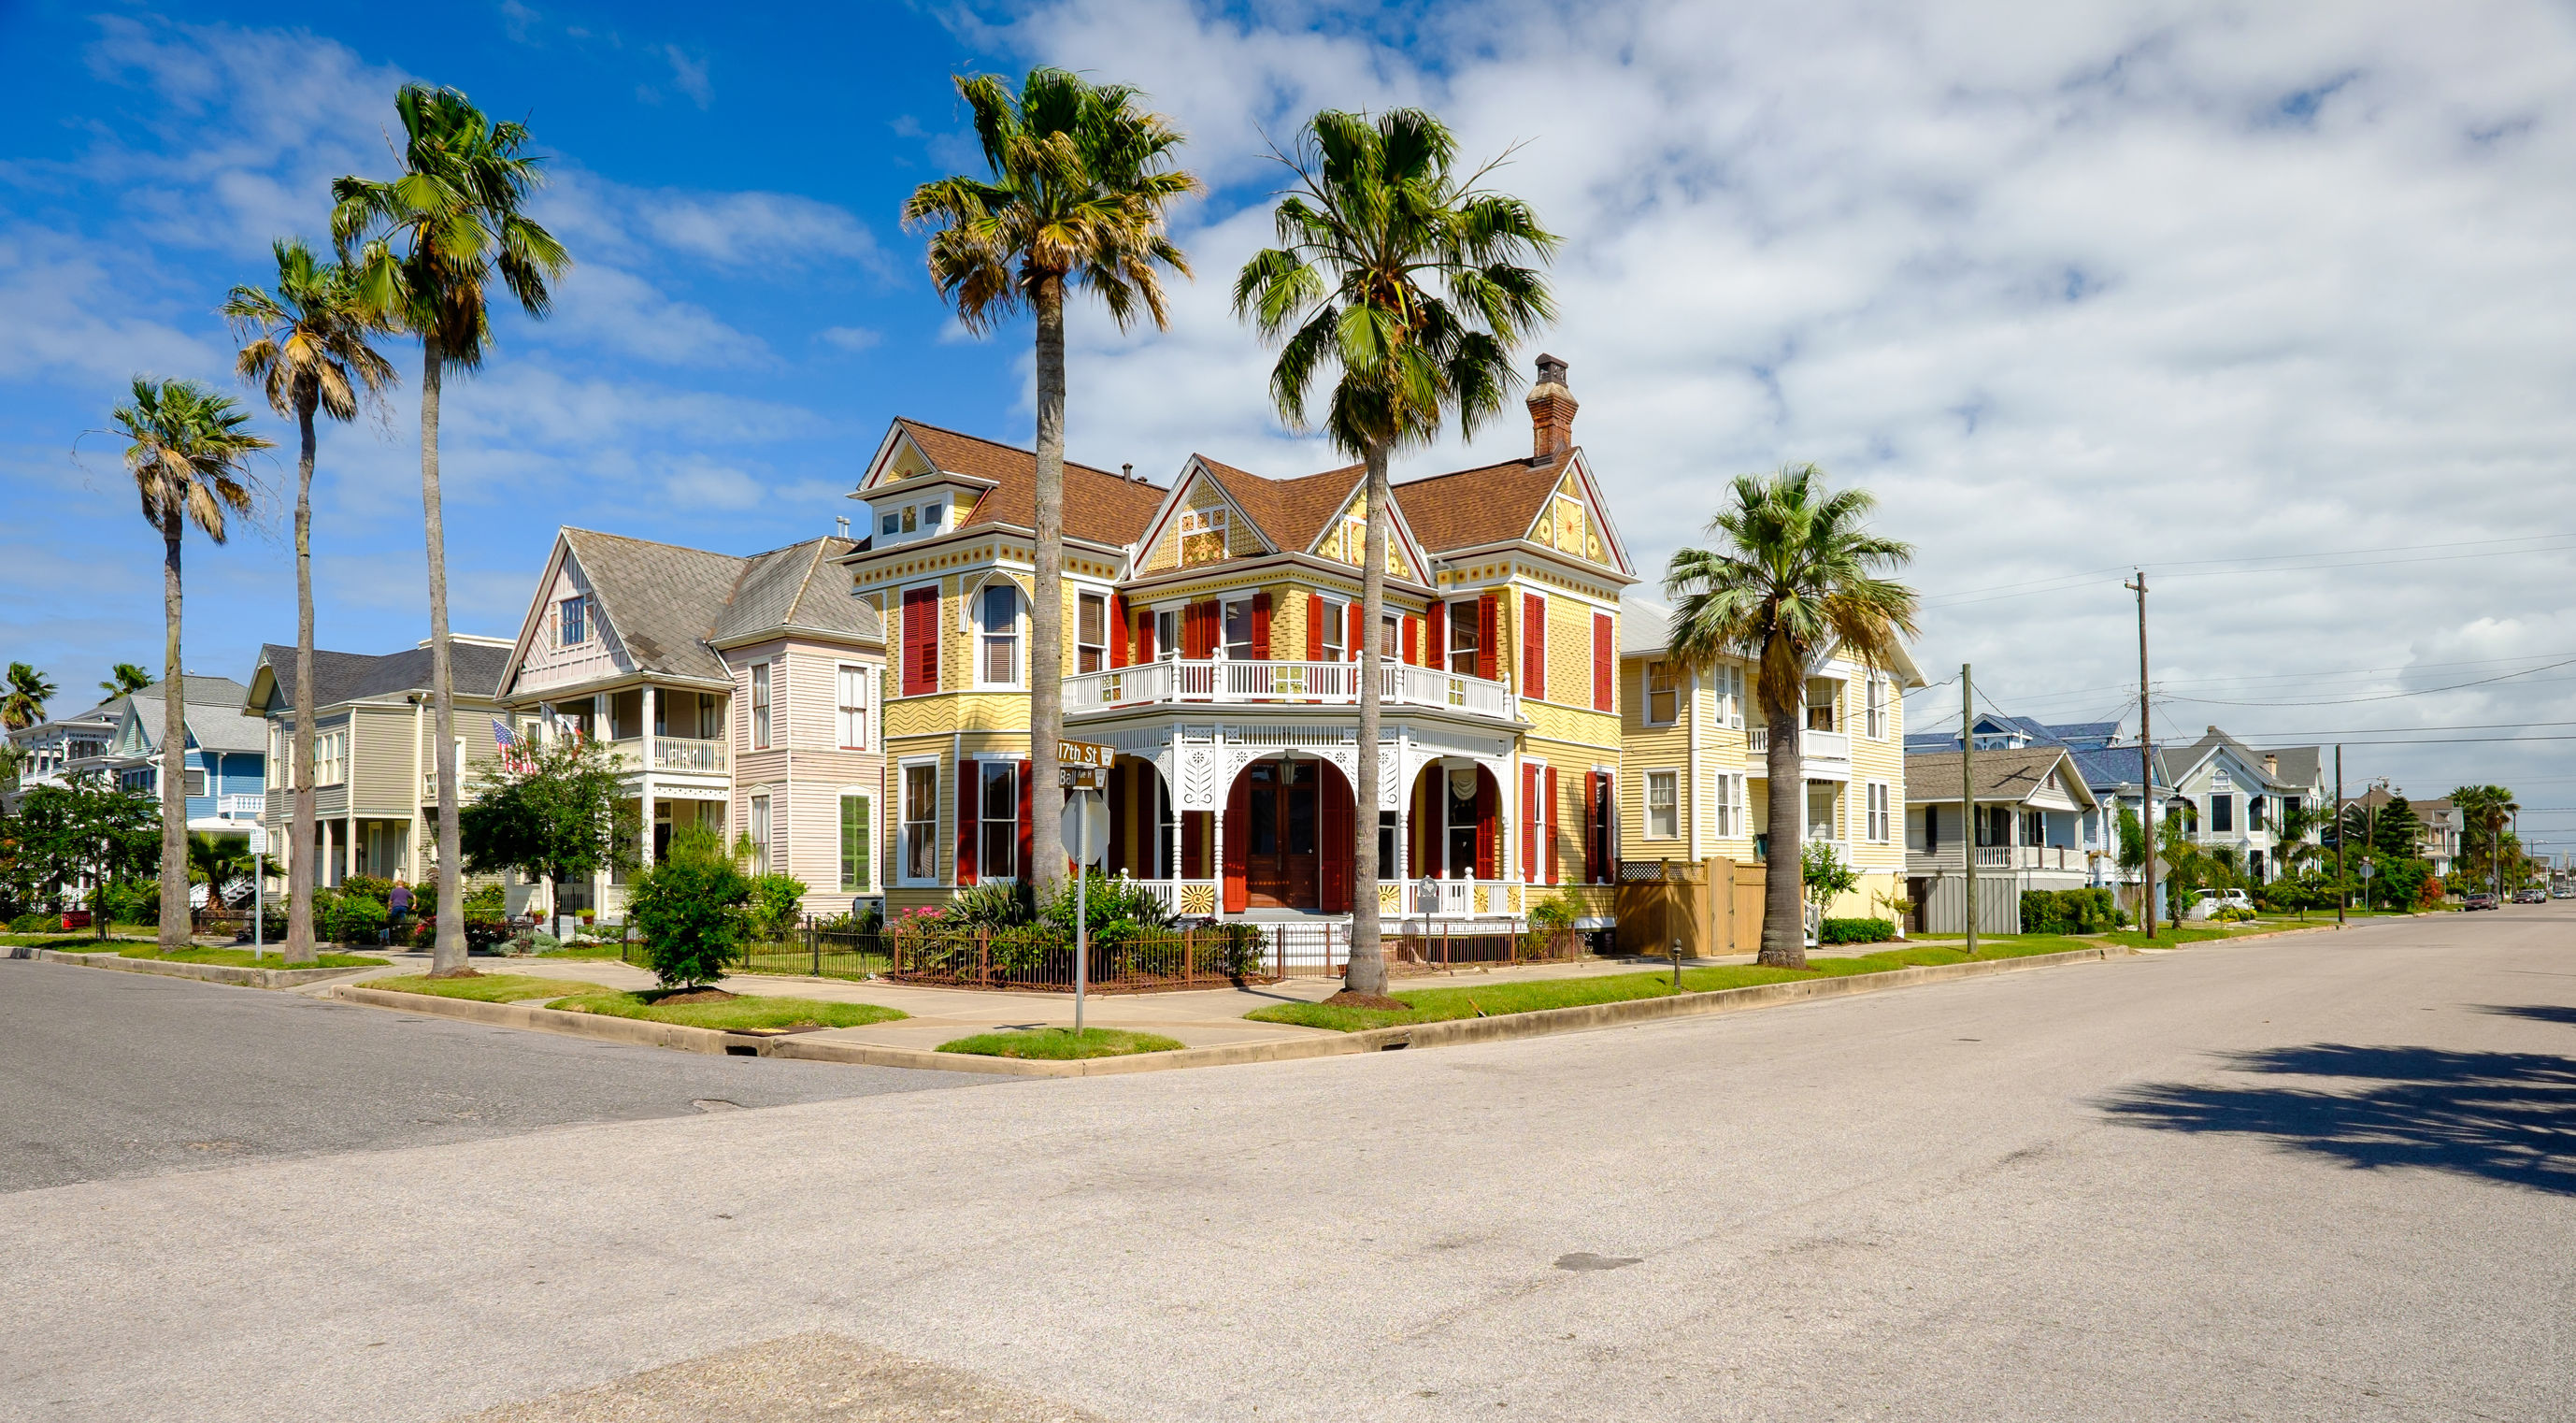 General Stock Image oh Houses